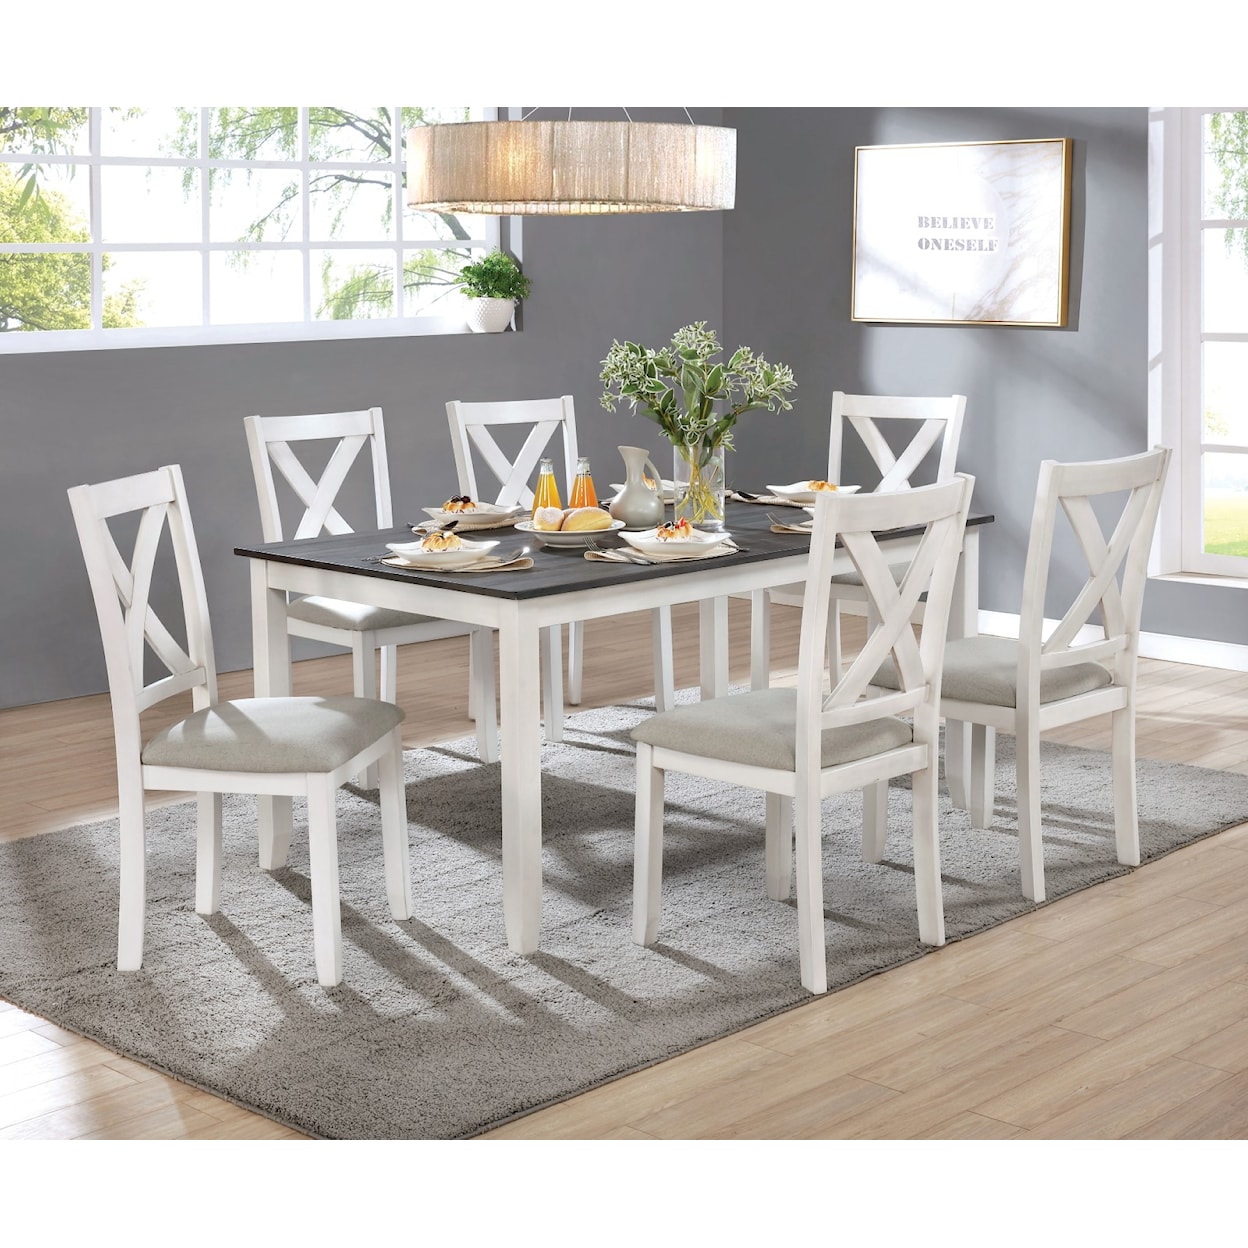 Furniture of America Anya 7-Piece Dining Table Set